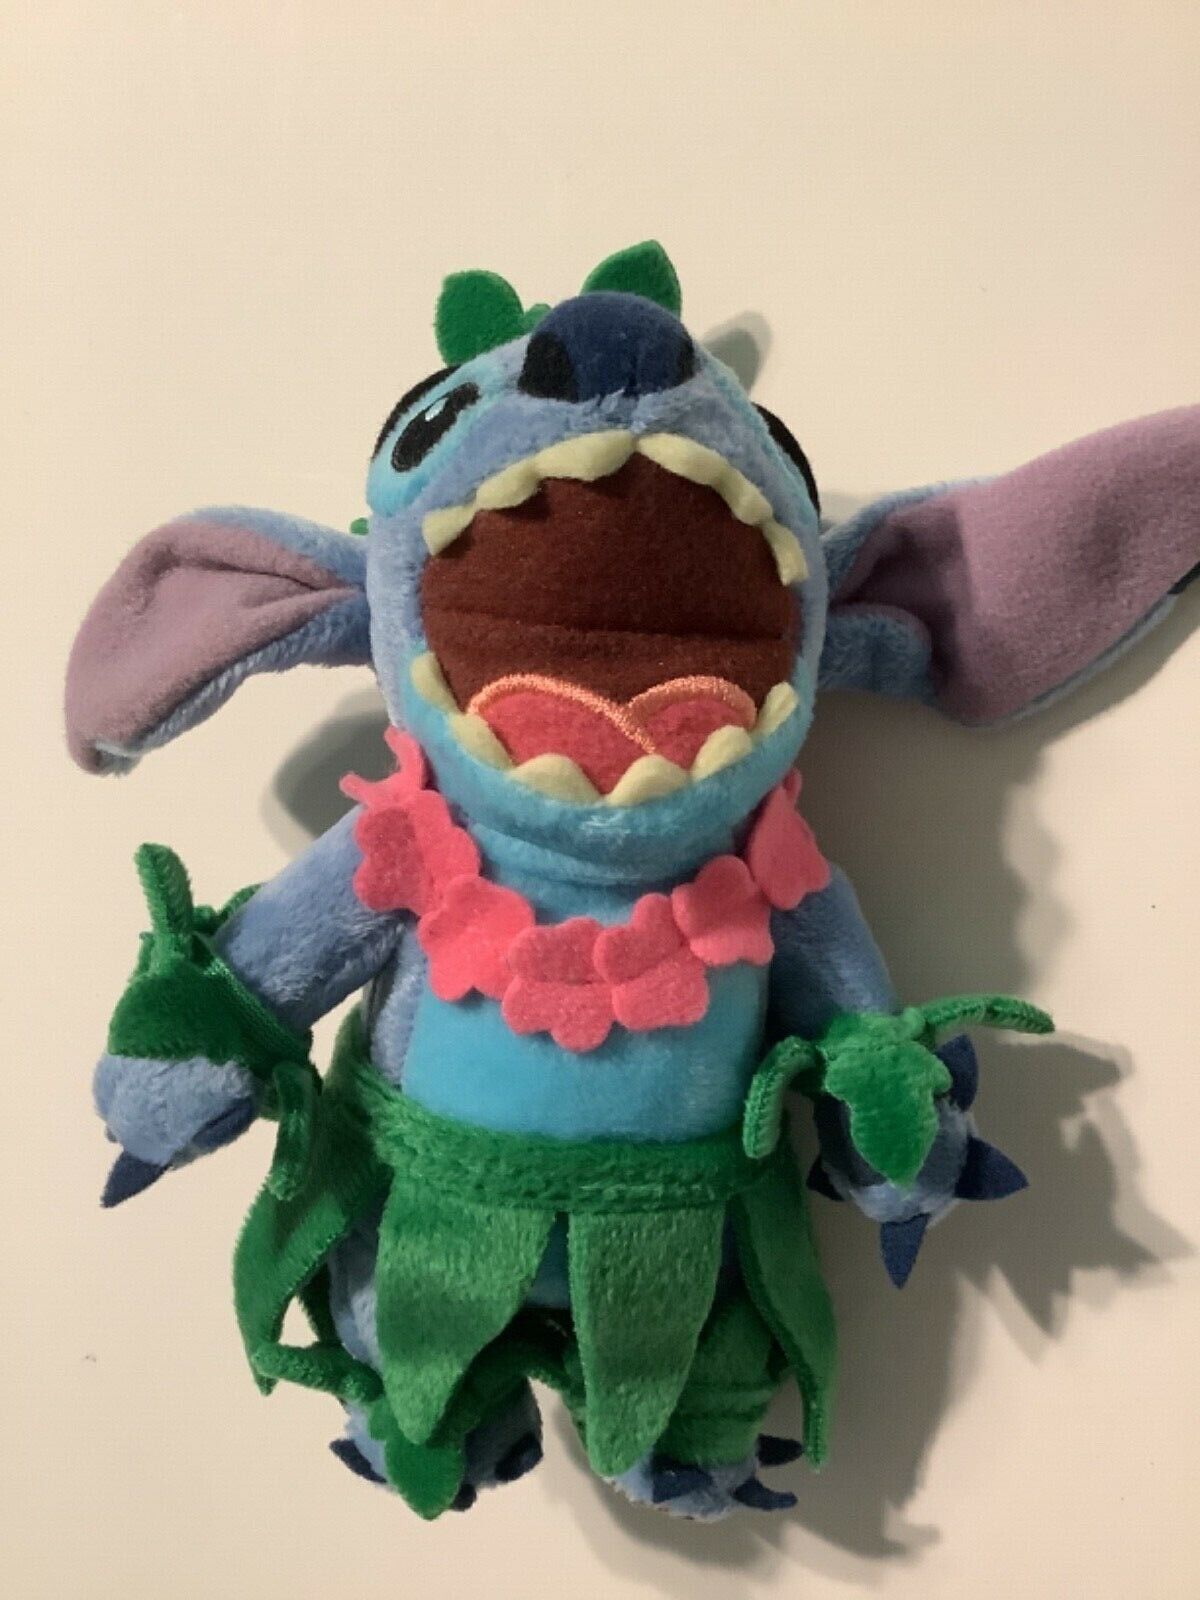 2005 Disney World Exclusive Stitch Plush Once Upon A Toy Collectors Doll 5.5”nwt